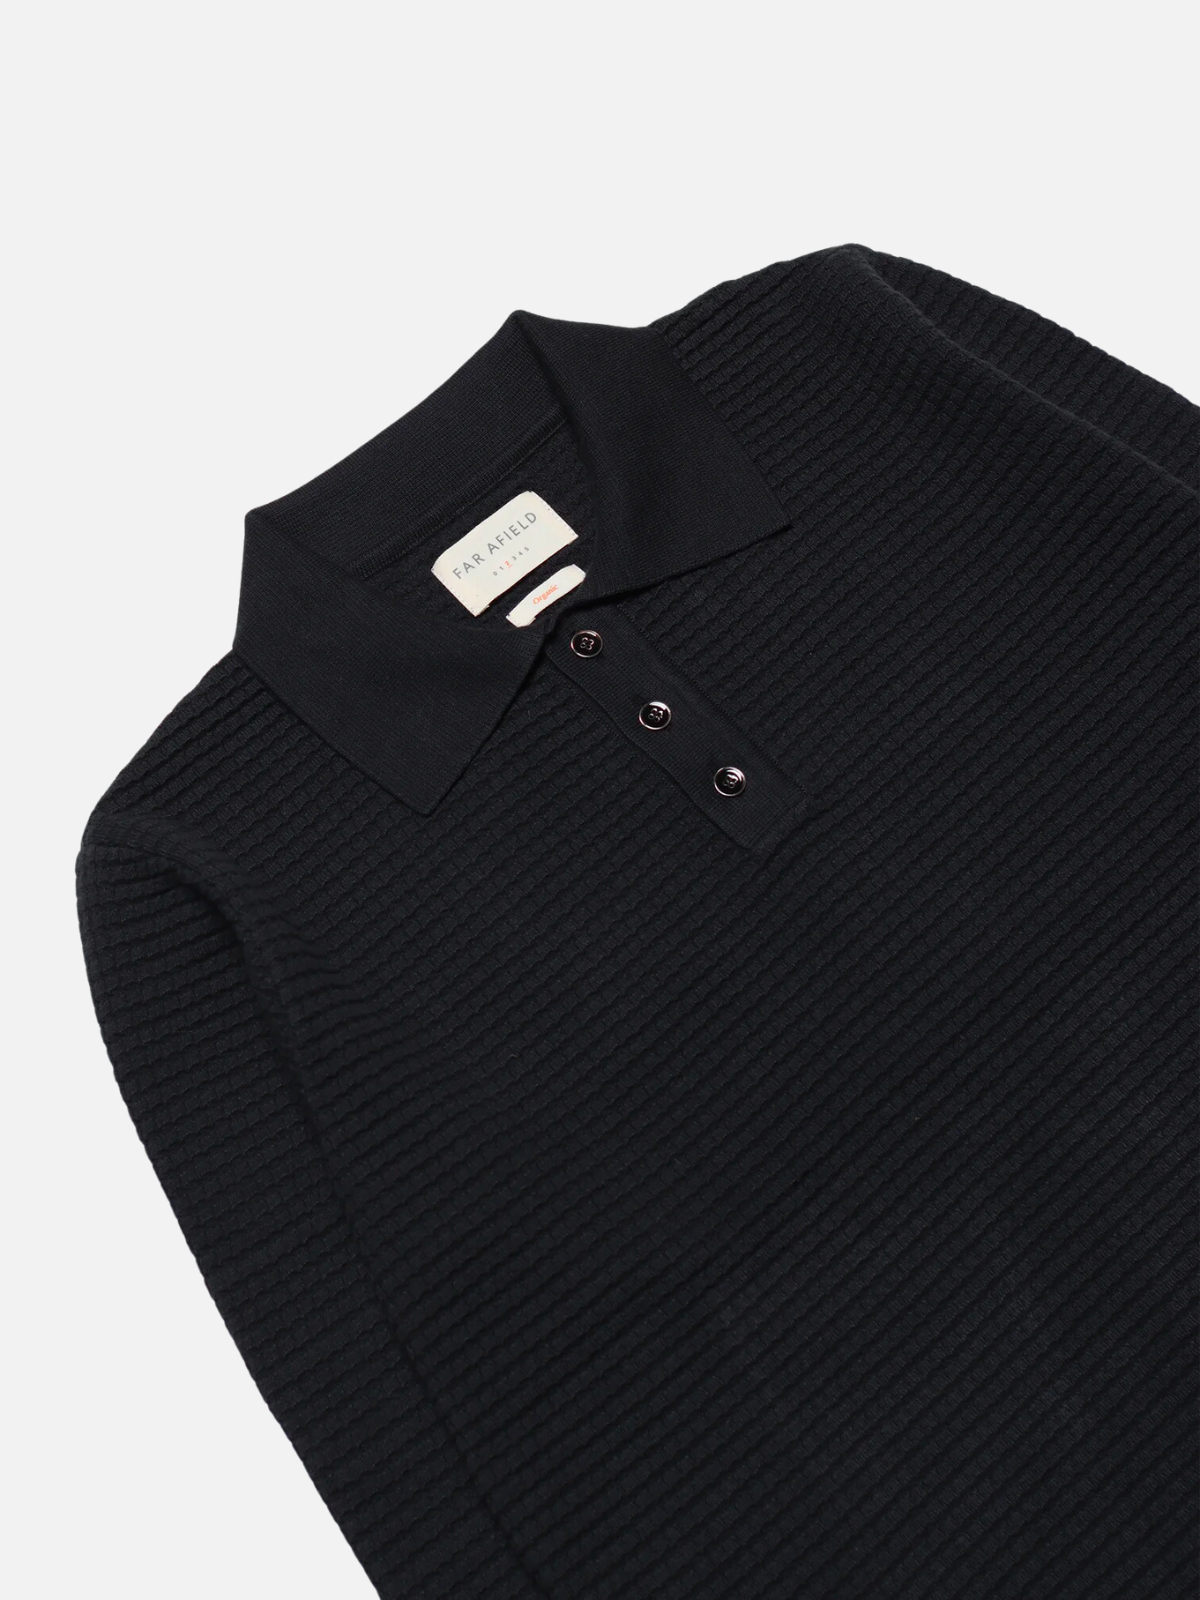 Far Afield Renard Knitted Polo Meteorite Black Textured Sweater Pullover Kempt Mens Clothing Athens Georgia